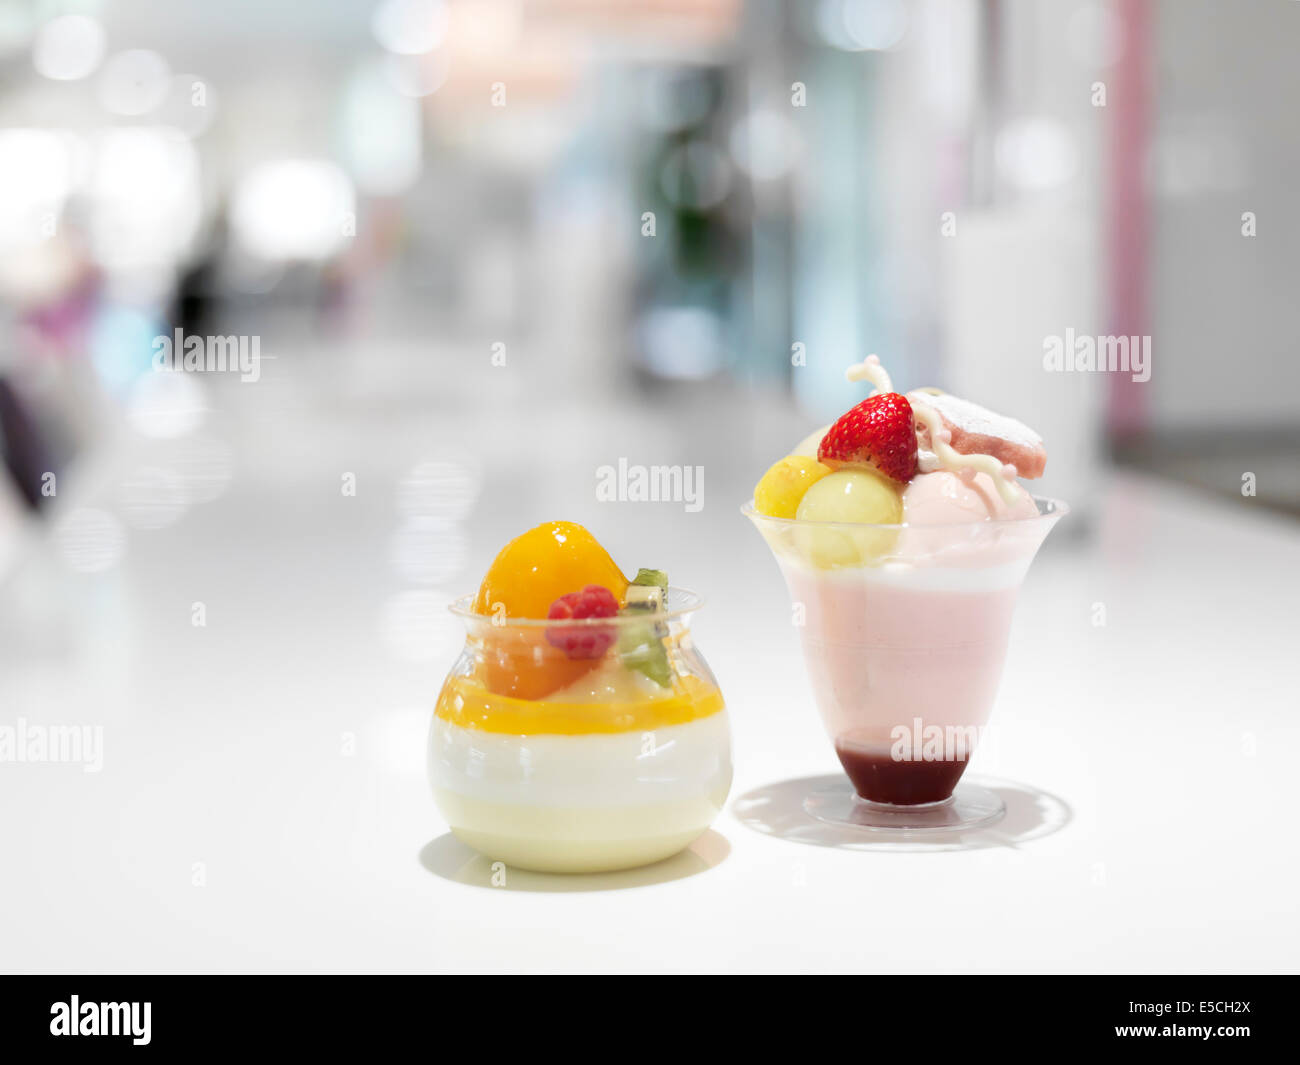 Ice cream and fruit parfait glasses at a cafe Stock Photo